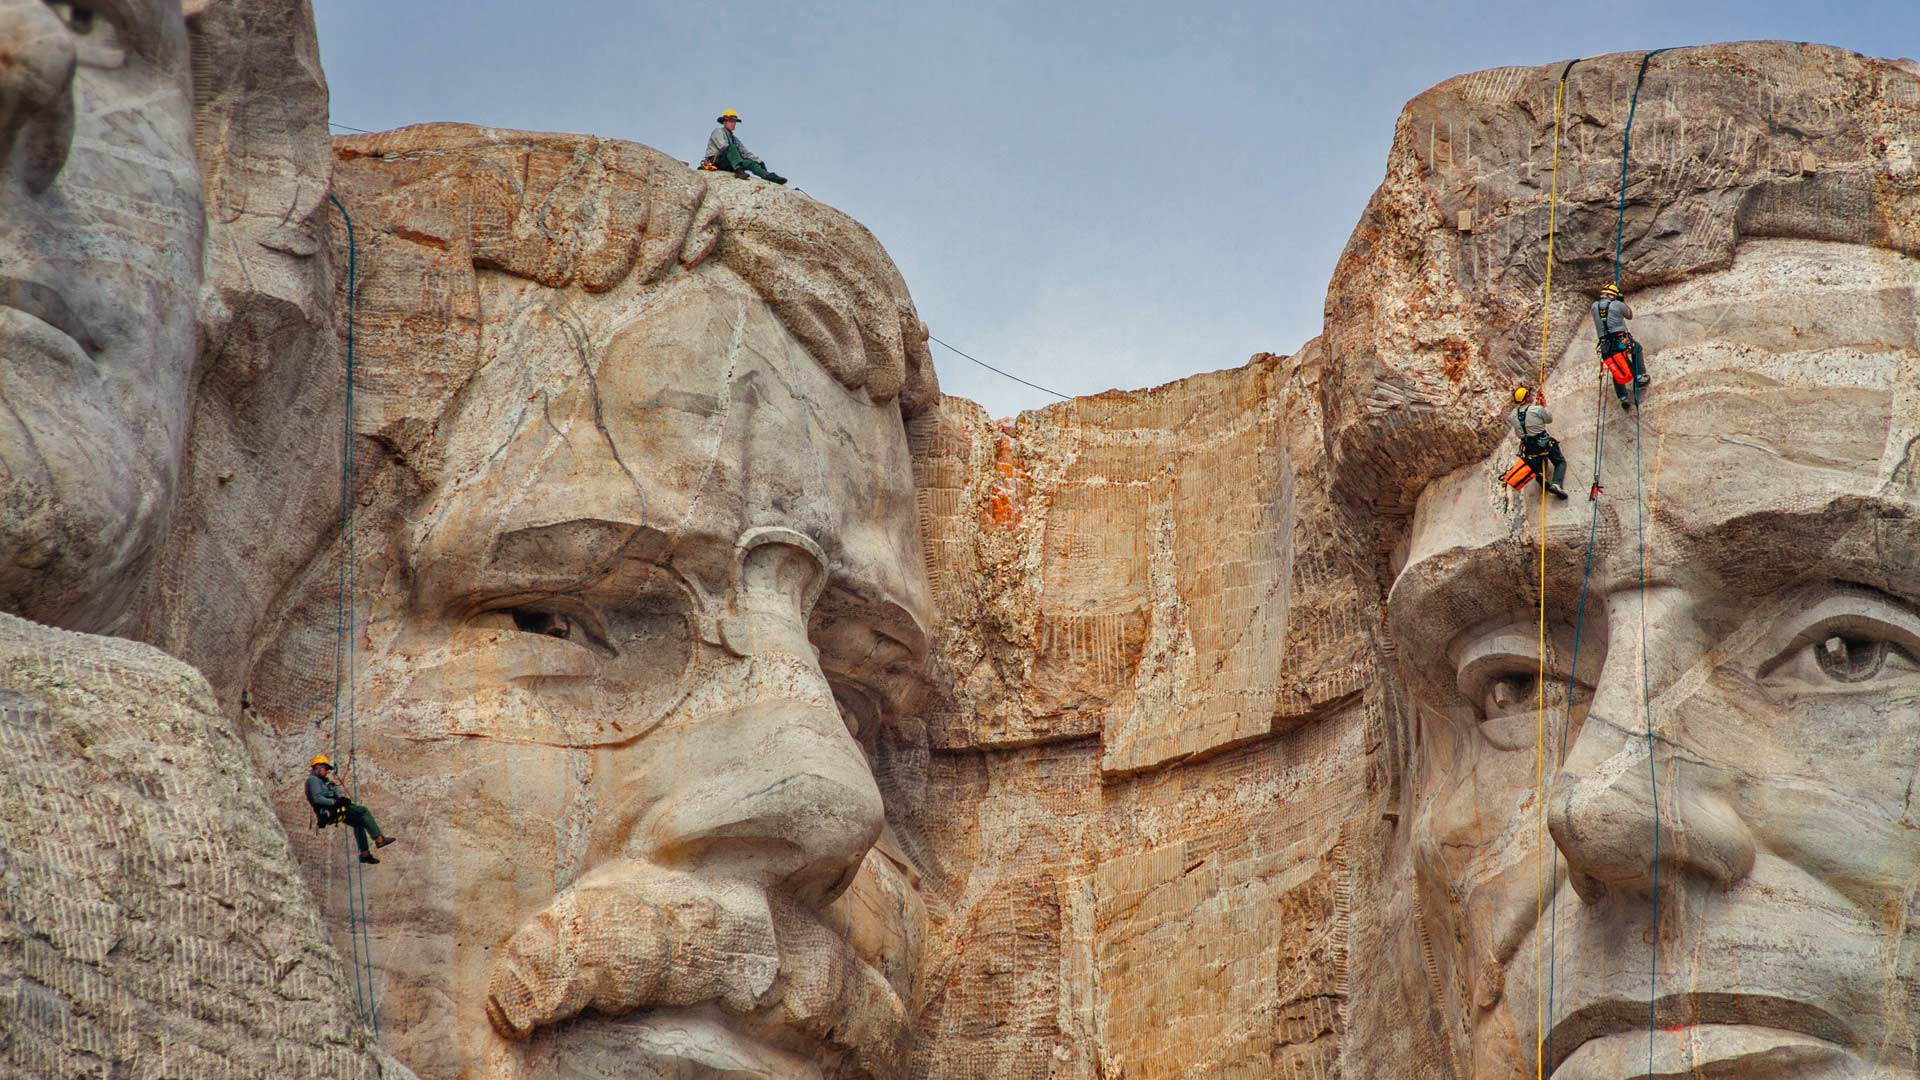 Park service employees inspecting Mount Rushmore National Memorial, South Dakota - Universal Images Group via Getty Images)